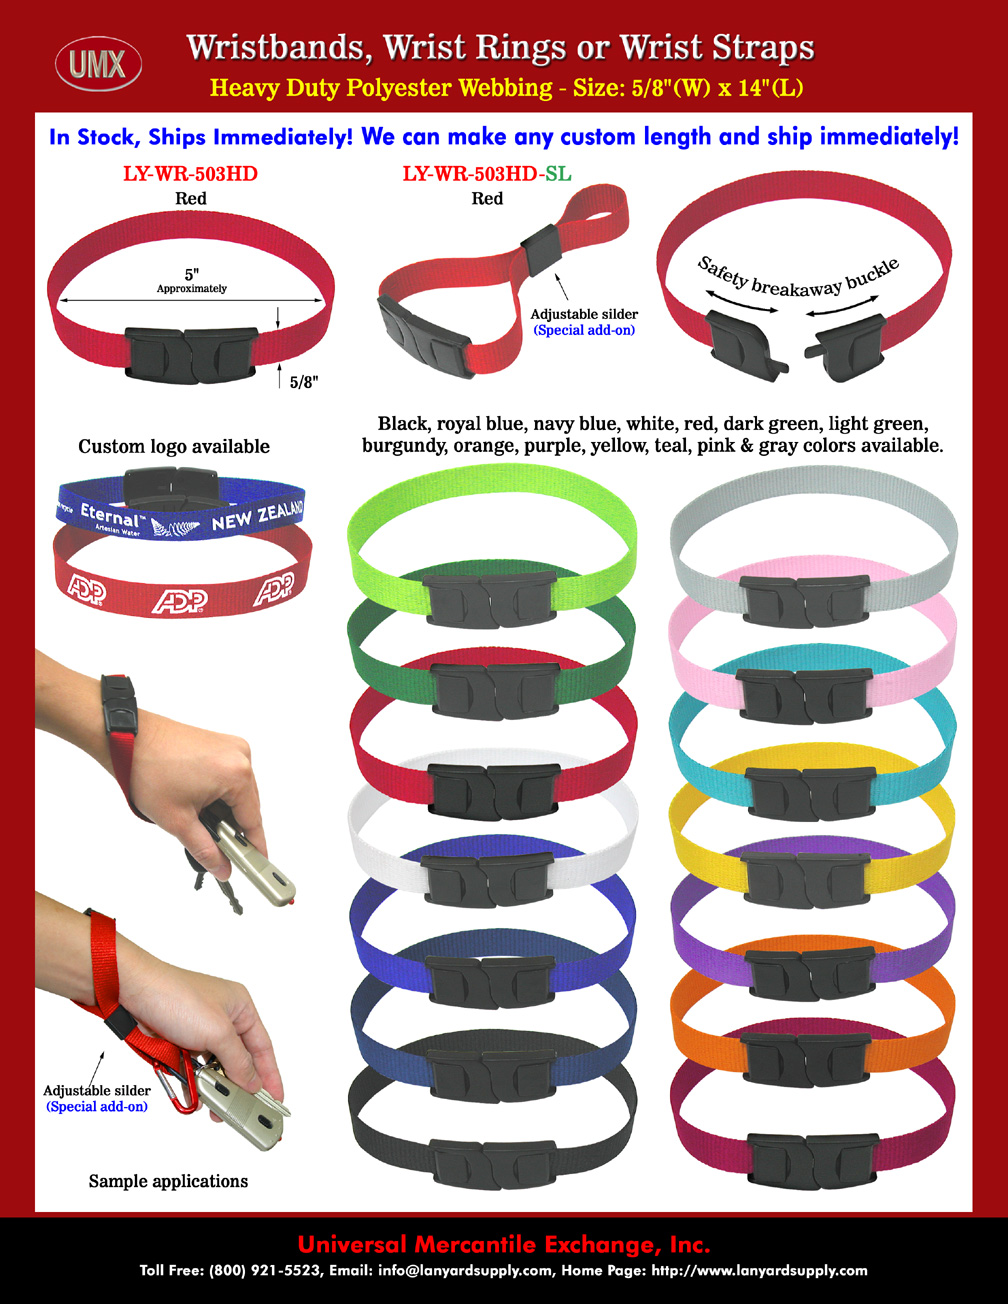 A General Introduction To Round Wrist Ring, Wrist Band and Wrist Strap Lanyards come with 1/8", 3/8", 5/8", 3/4" and 1" diameter or width of round cord or flat straps.